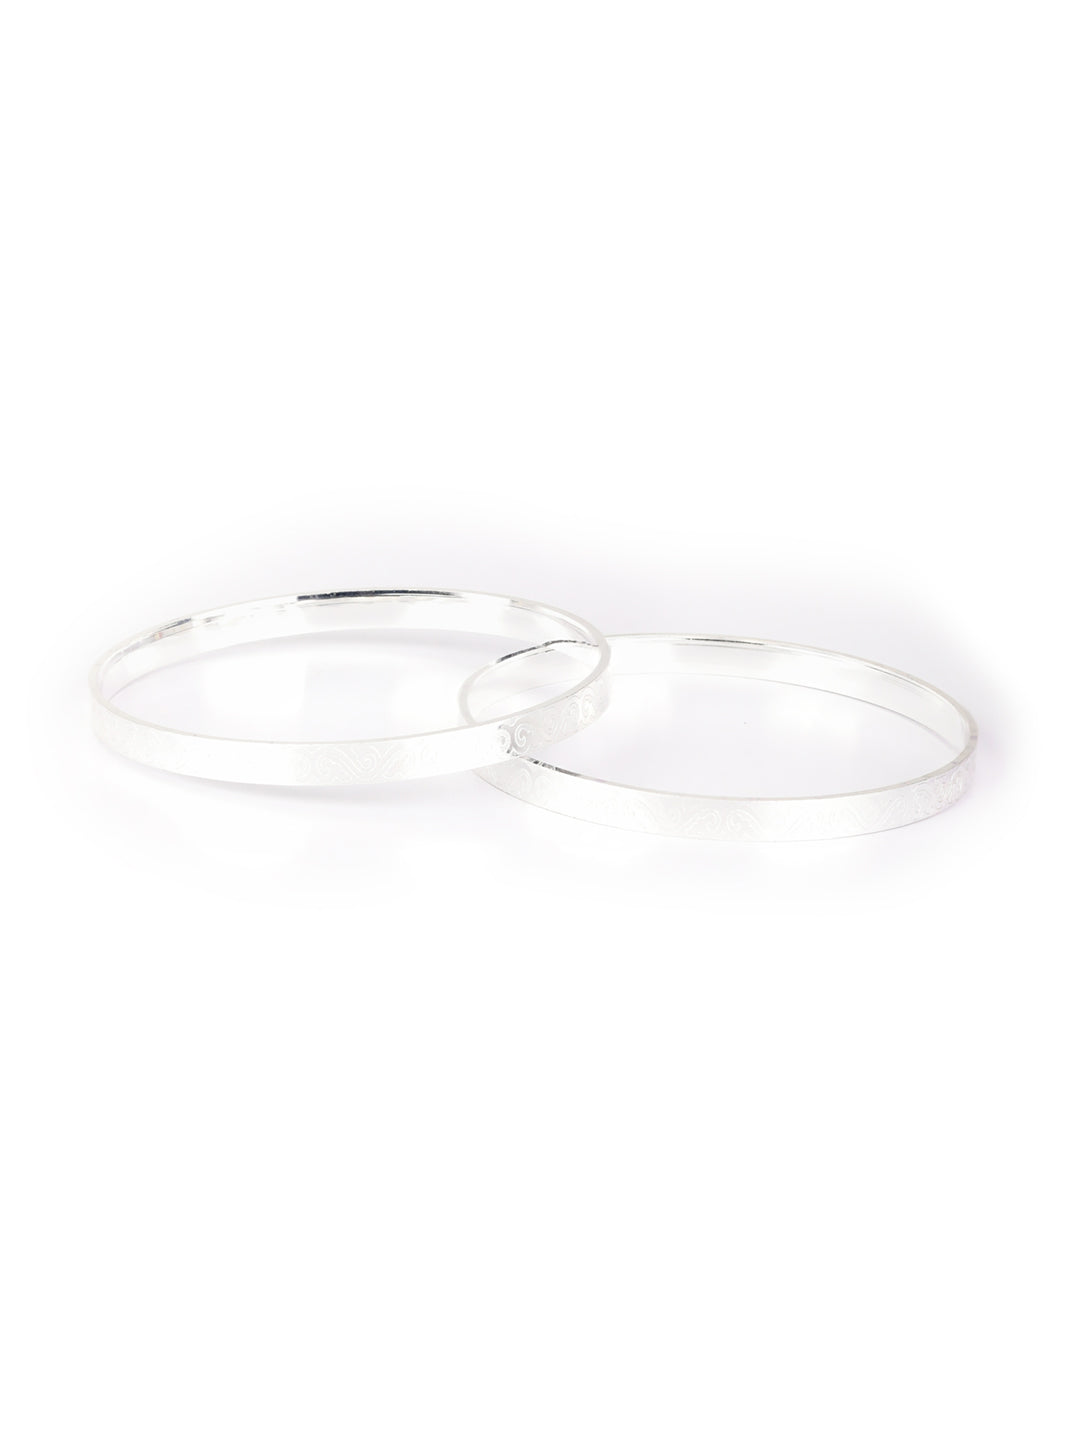 Set of 2 Silver Plated Bangles Set